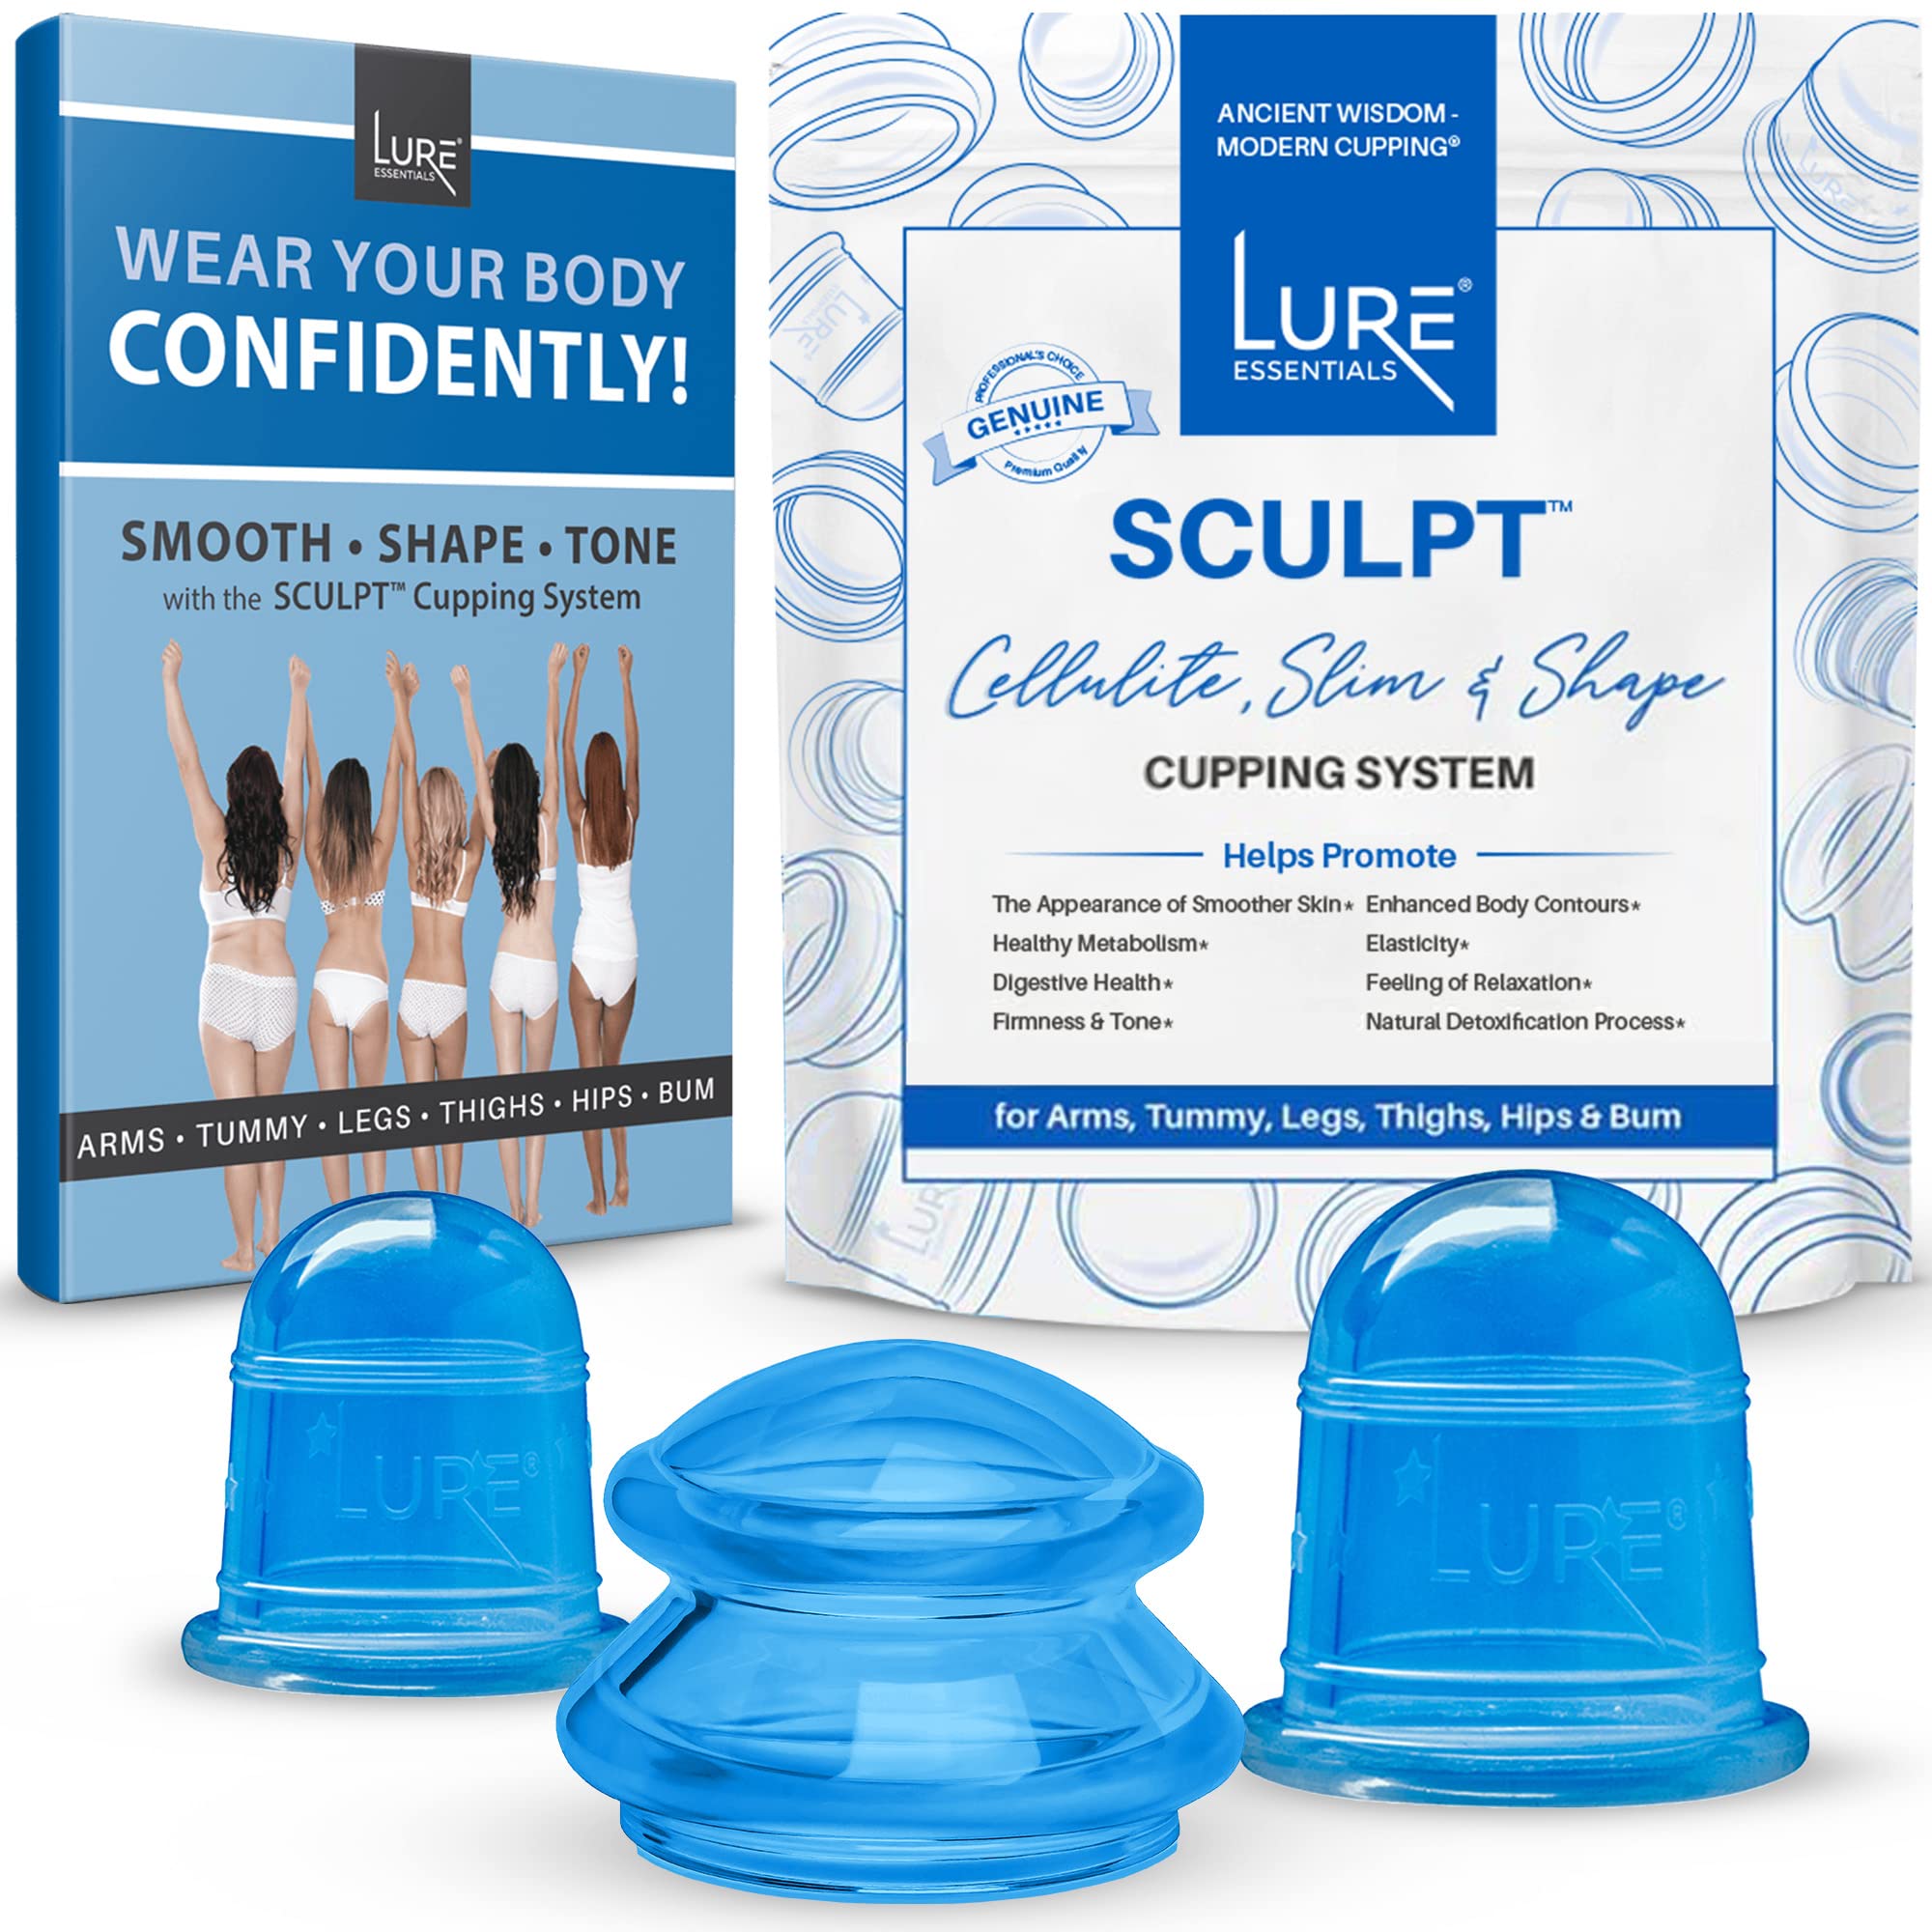 LURE Essentials Edge Cupping Therapy Set - Silicone Cupping Kit for Massage  - 4 Cups for Cupping Therapy, Blue